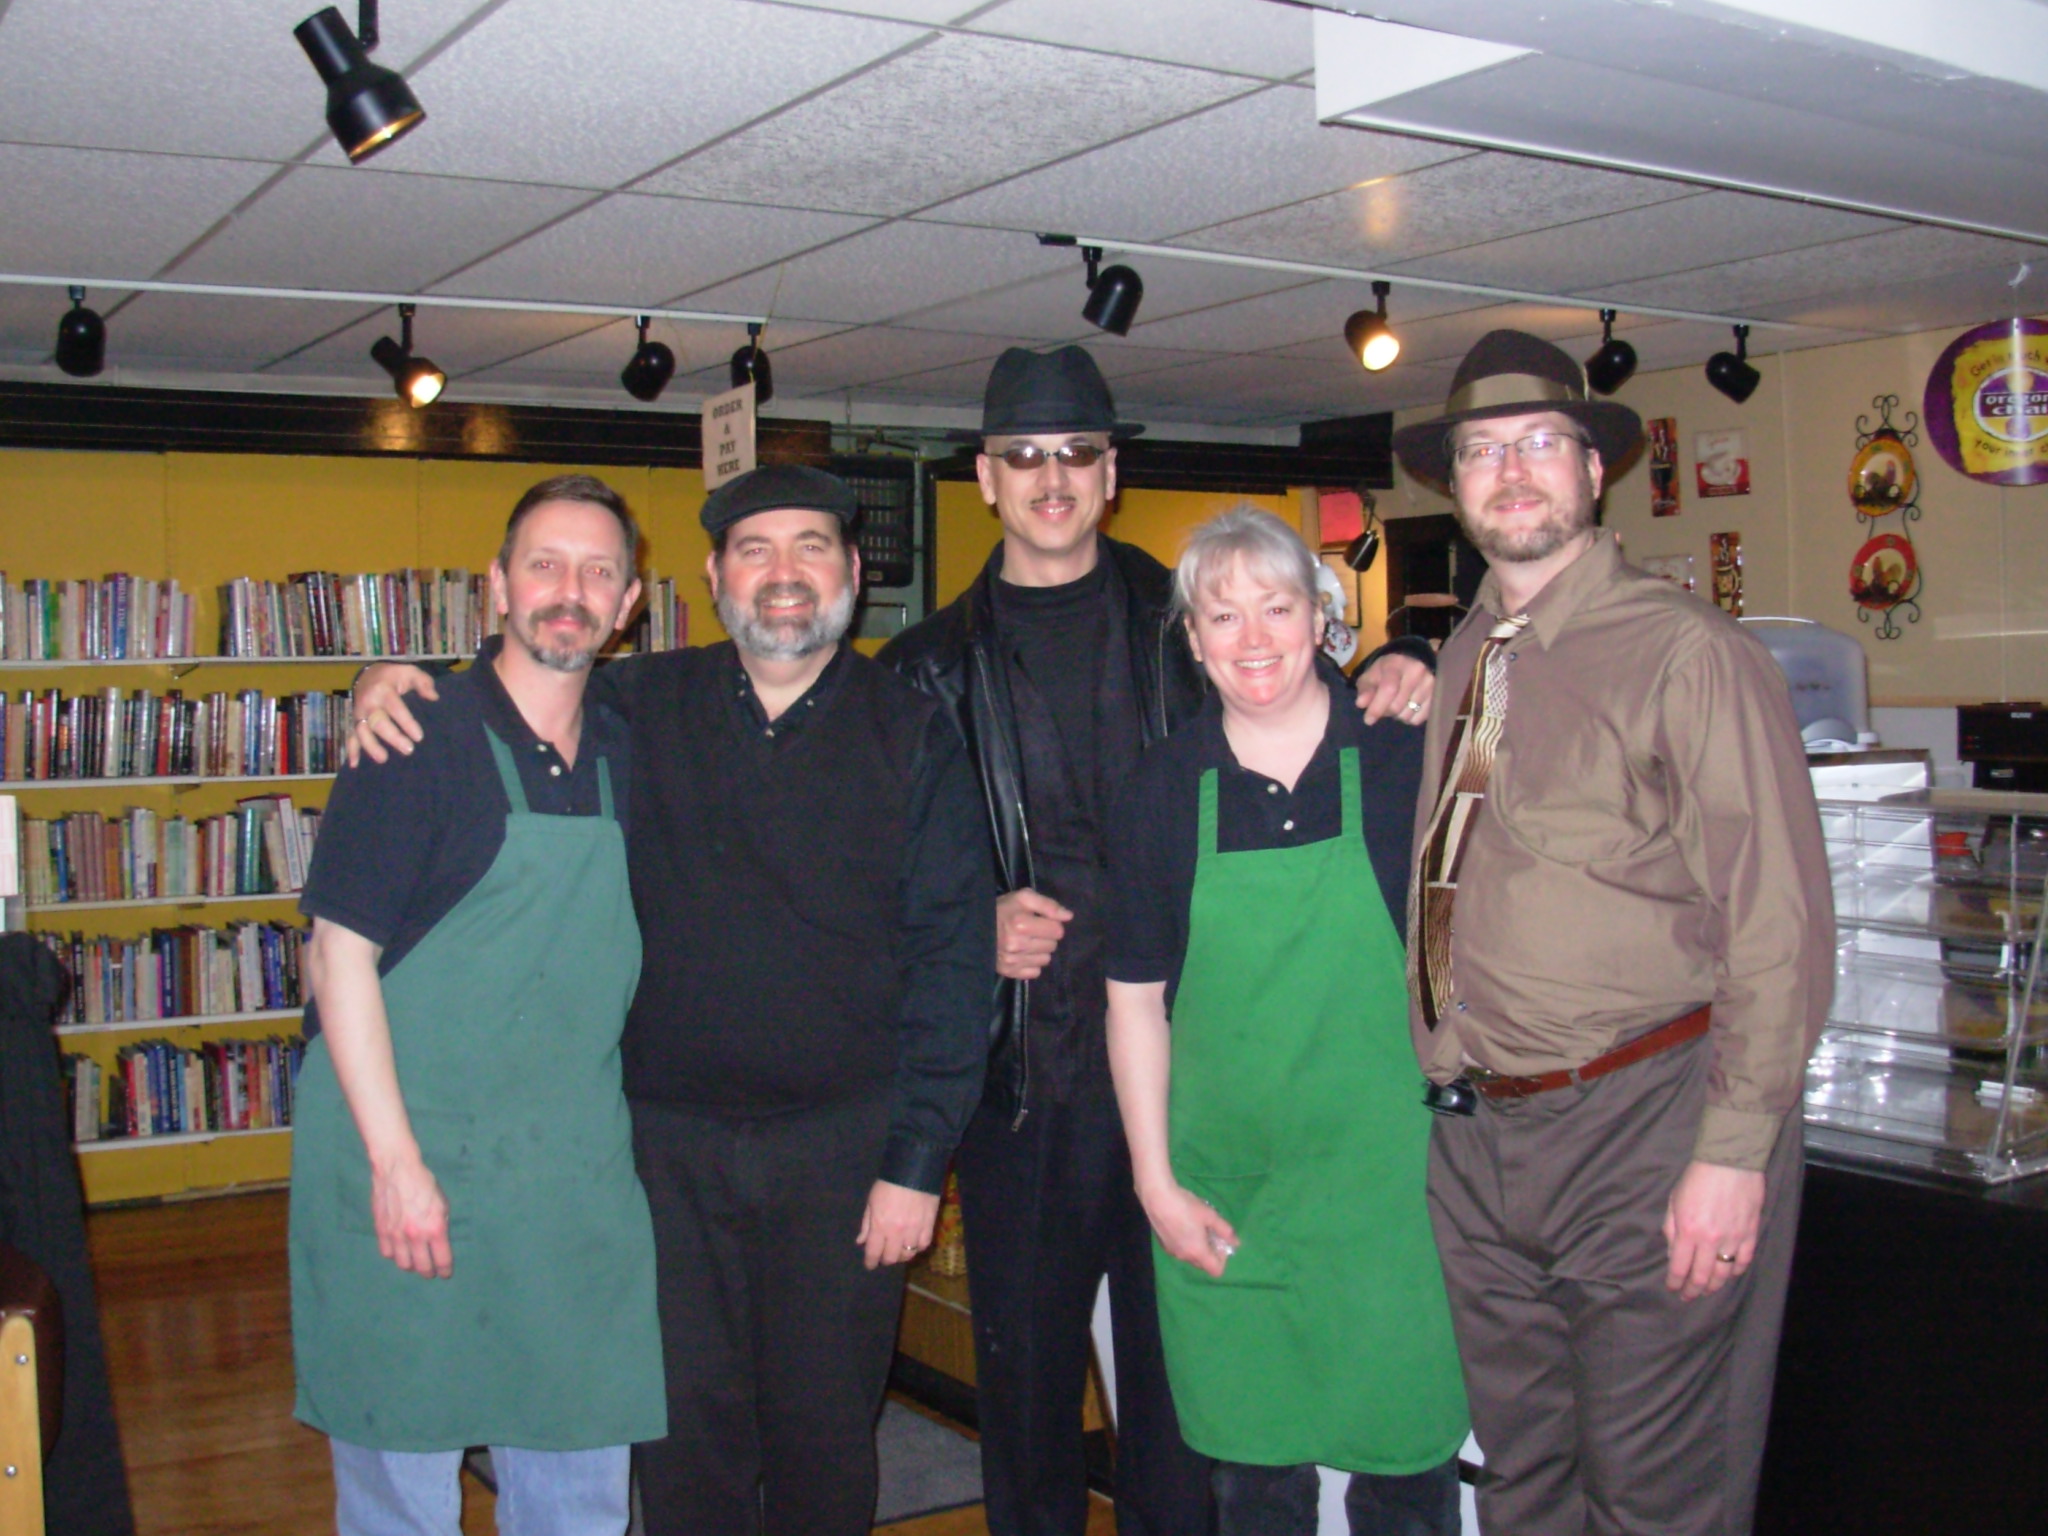 Pete & Tess with the Guys
Warm Hearts Cafe & Bookstore of Mechanicsburg
